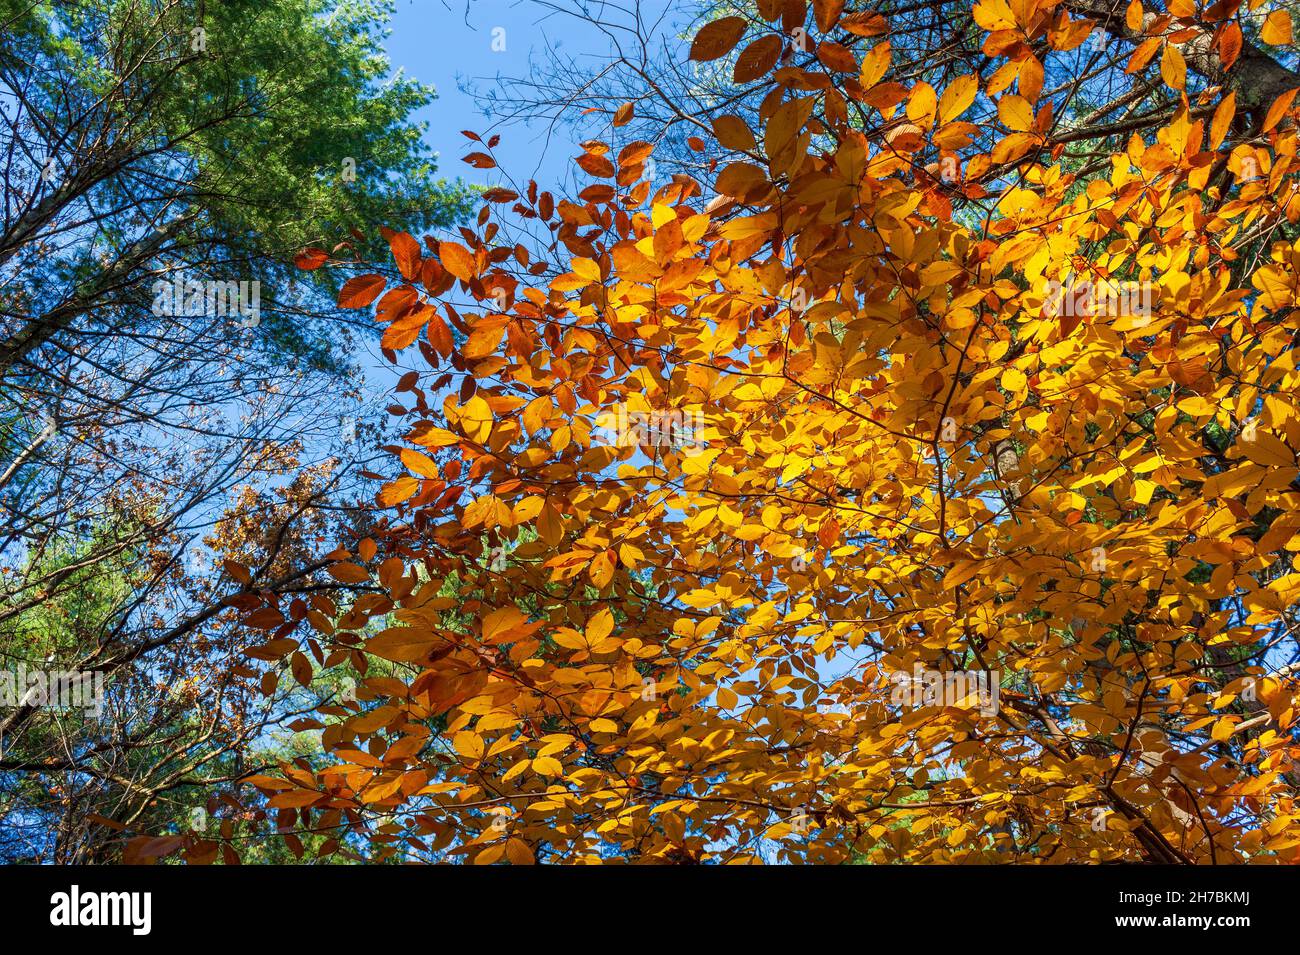 Twigs of an American beech tree (Fagus grandifolia) in peak fall foliage, with leaves in shades of yellow. Assabet River National Wildlife Refuge, MA Stock Photo